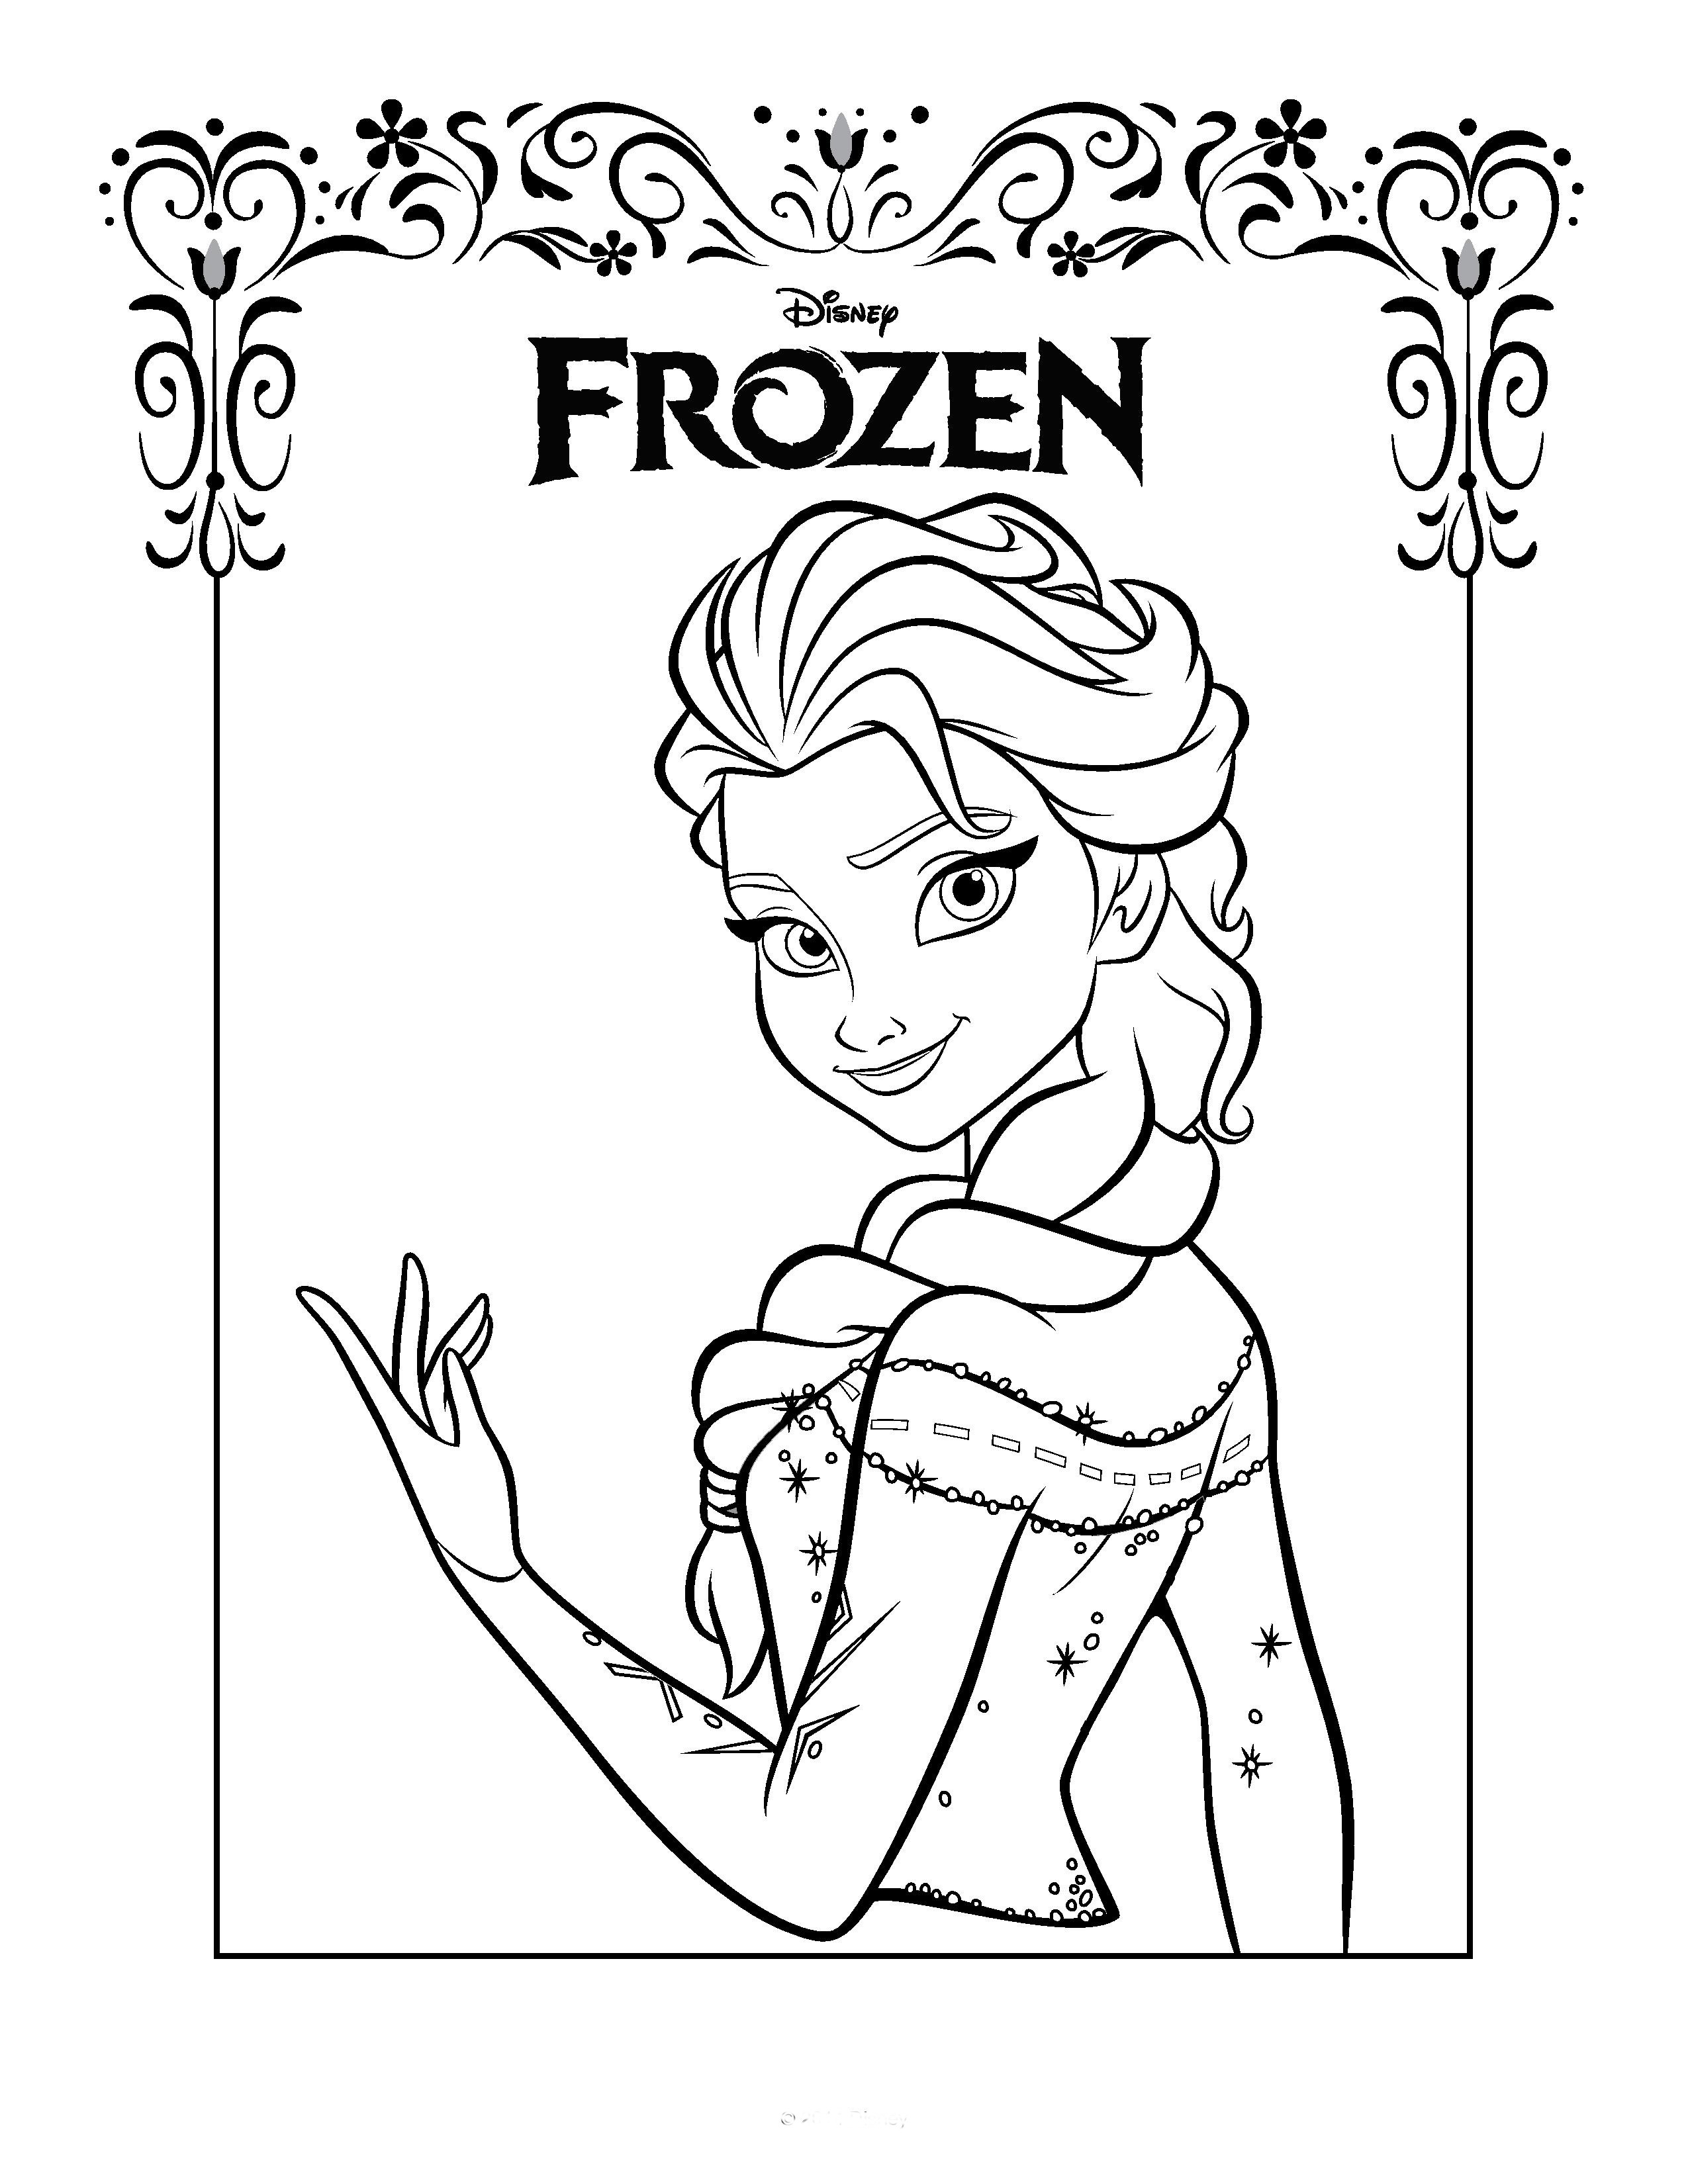 Frozen Printables Coloring Pages
 Free Printable Frozen Coloring Pages for Kids Best